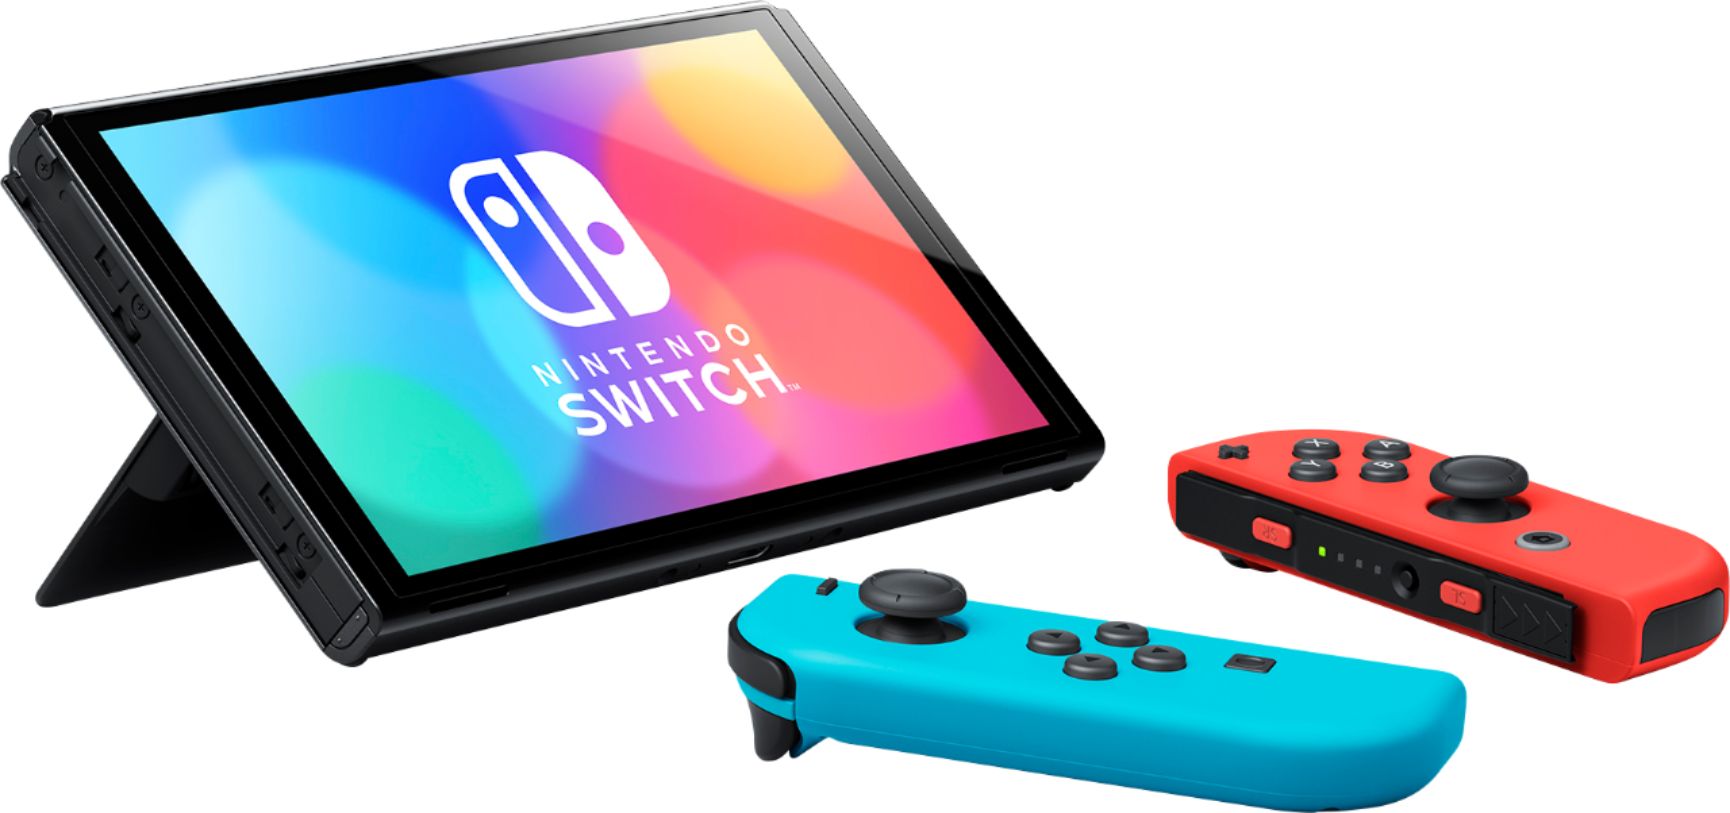 2021 New Nintendo Switch OLED Model Neon Red & Blue Joy Con 64GB Console HD Screen & LAN-Port Dock with Top 8 Game All-Time Best Sellers Bundle with Mytrix Accessories - Best Holiday Gift